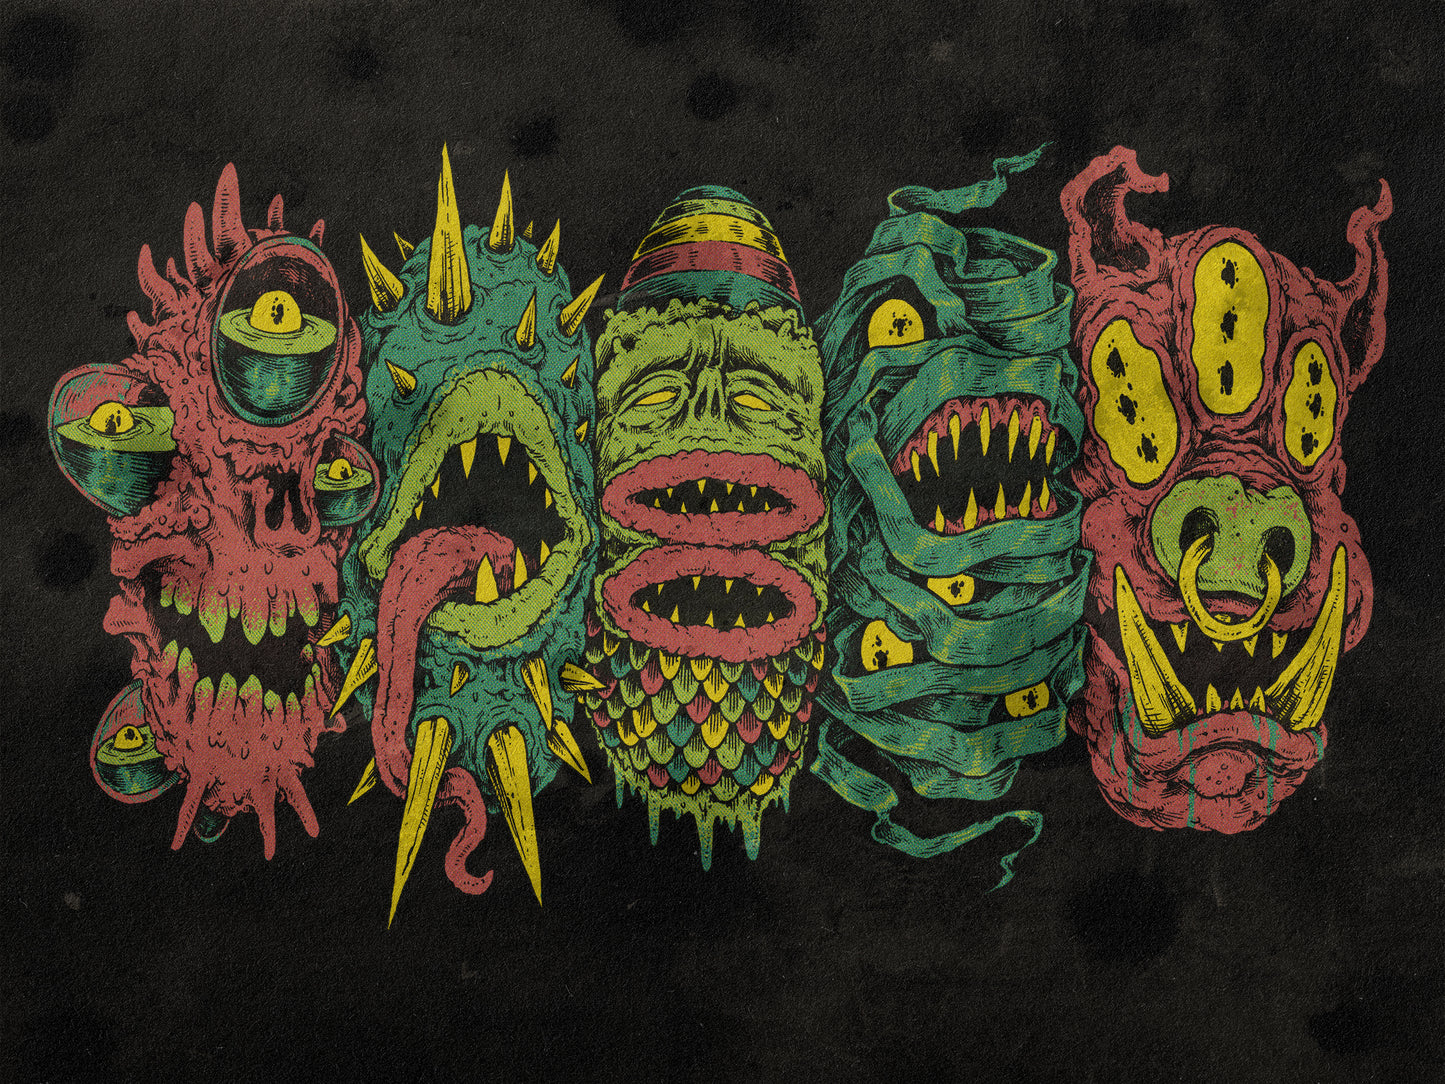 5 More Monster Heads in a Row Print